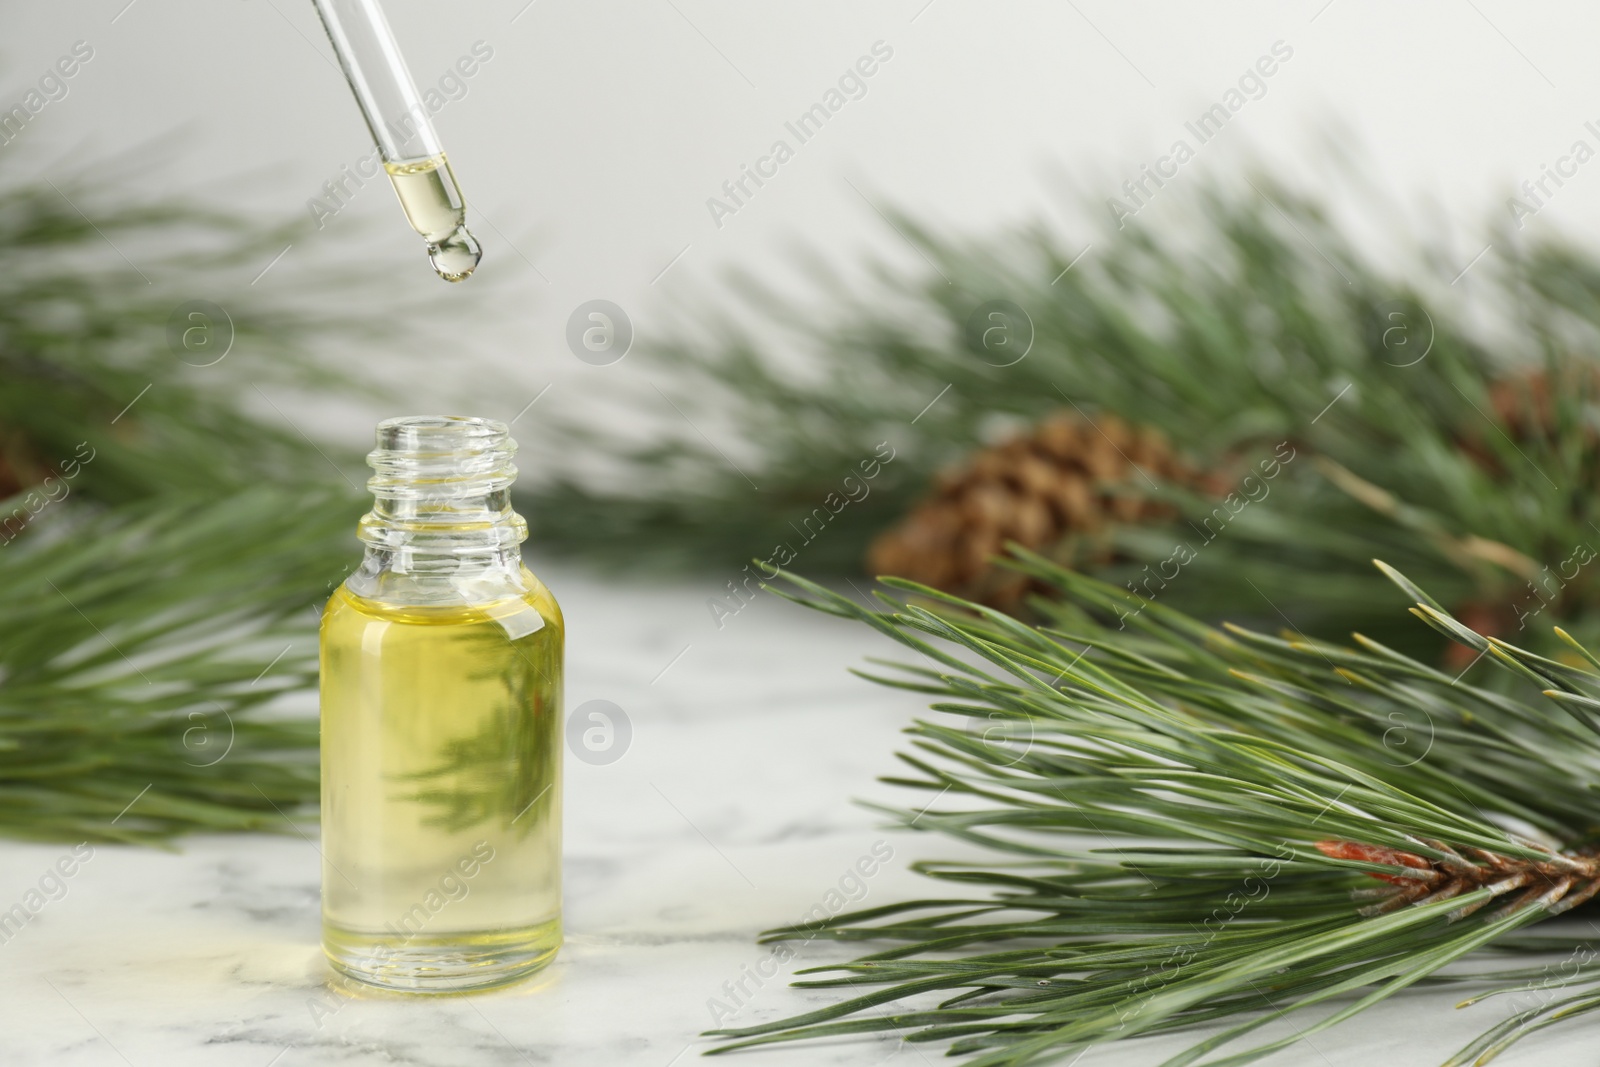 Photo of Dripping pine essential oil into bottle at white marble table. Space for text